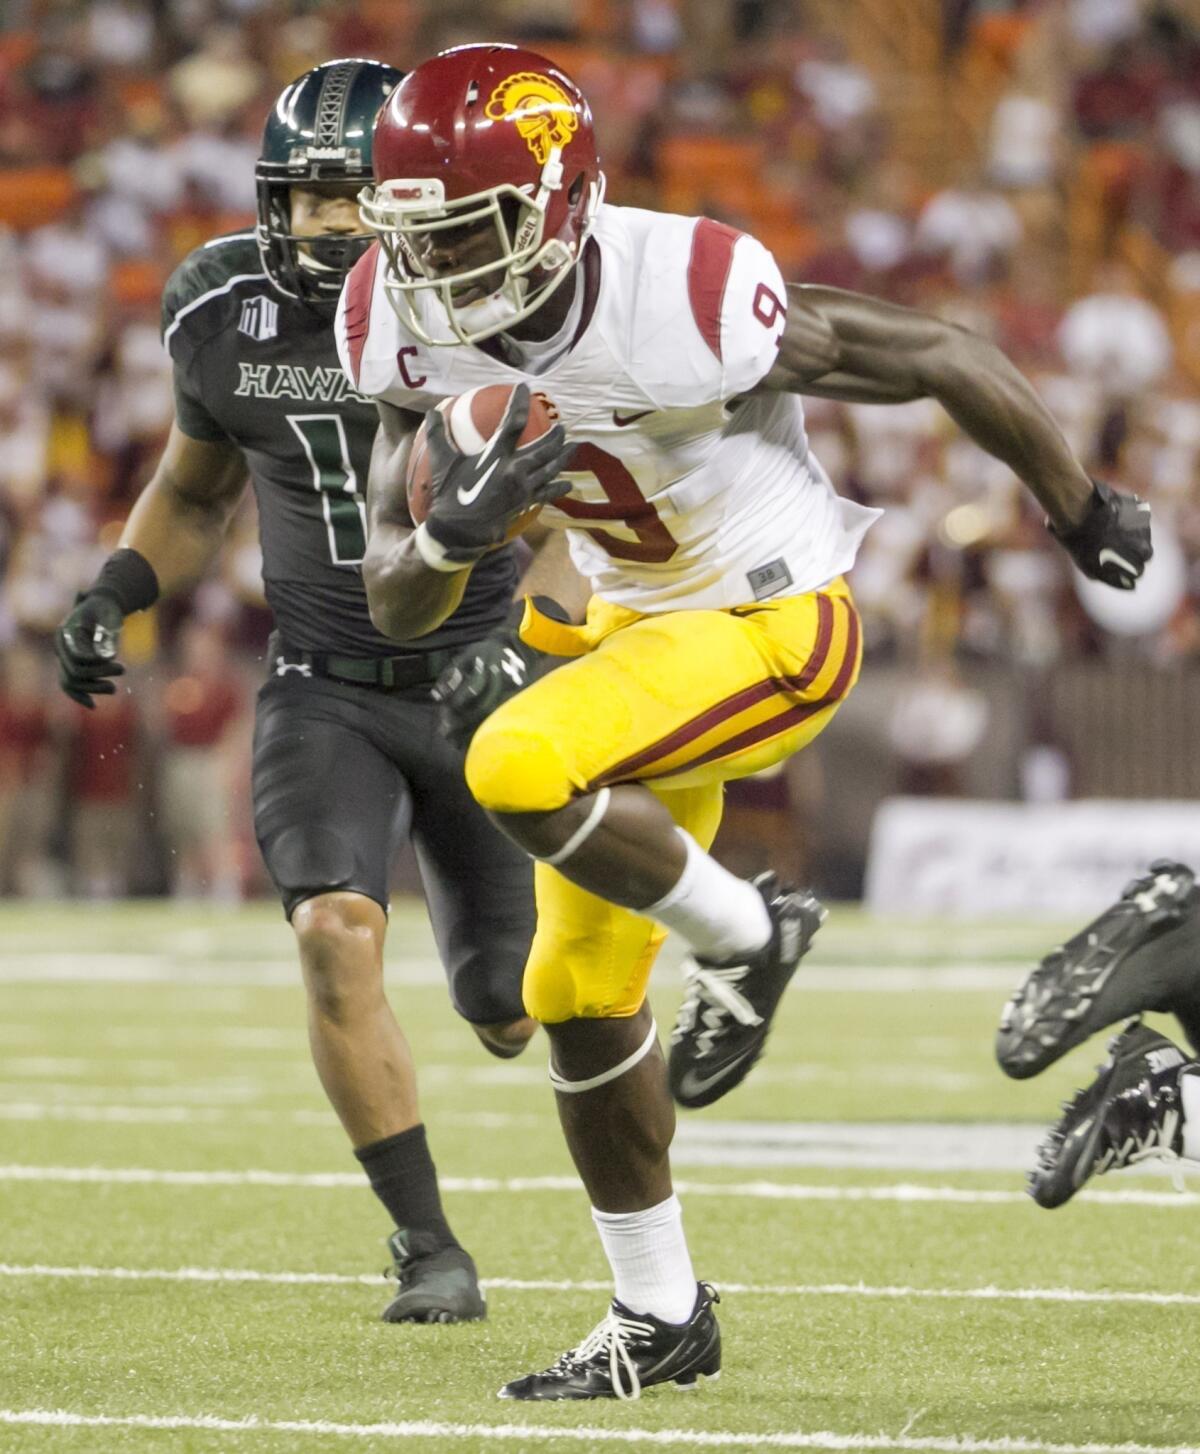 USC wide receiver Marqise Lee didn't have his best game against Hawaii on Thursday.